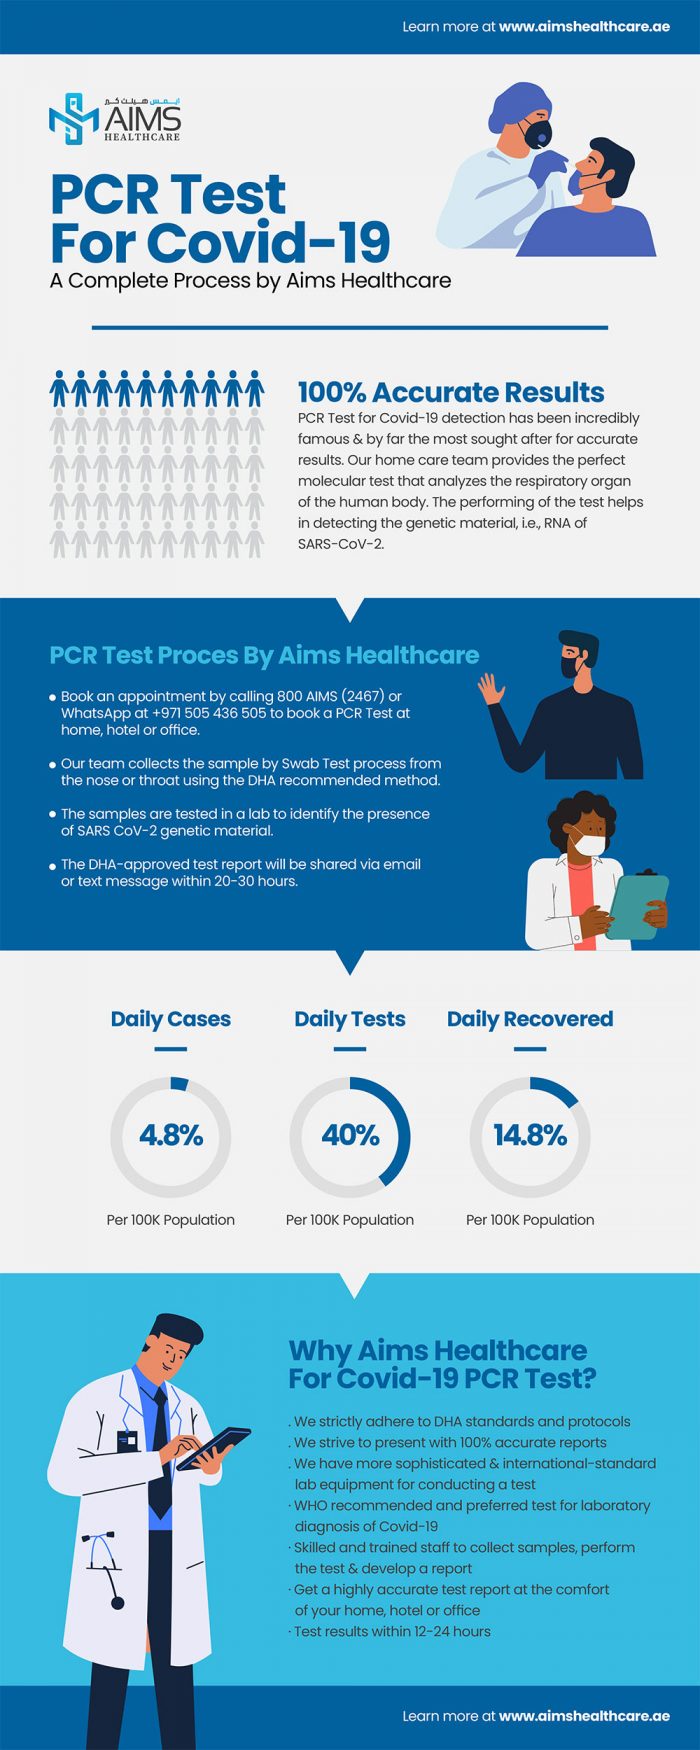 PCR Test For Covid-19 Detection By Aims Healthcare